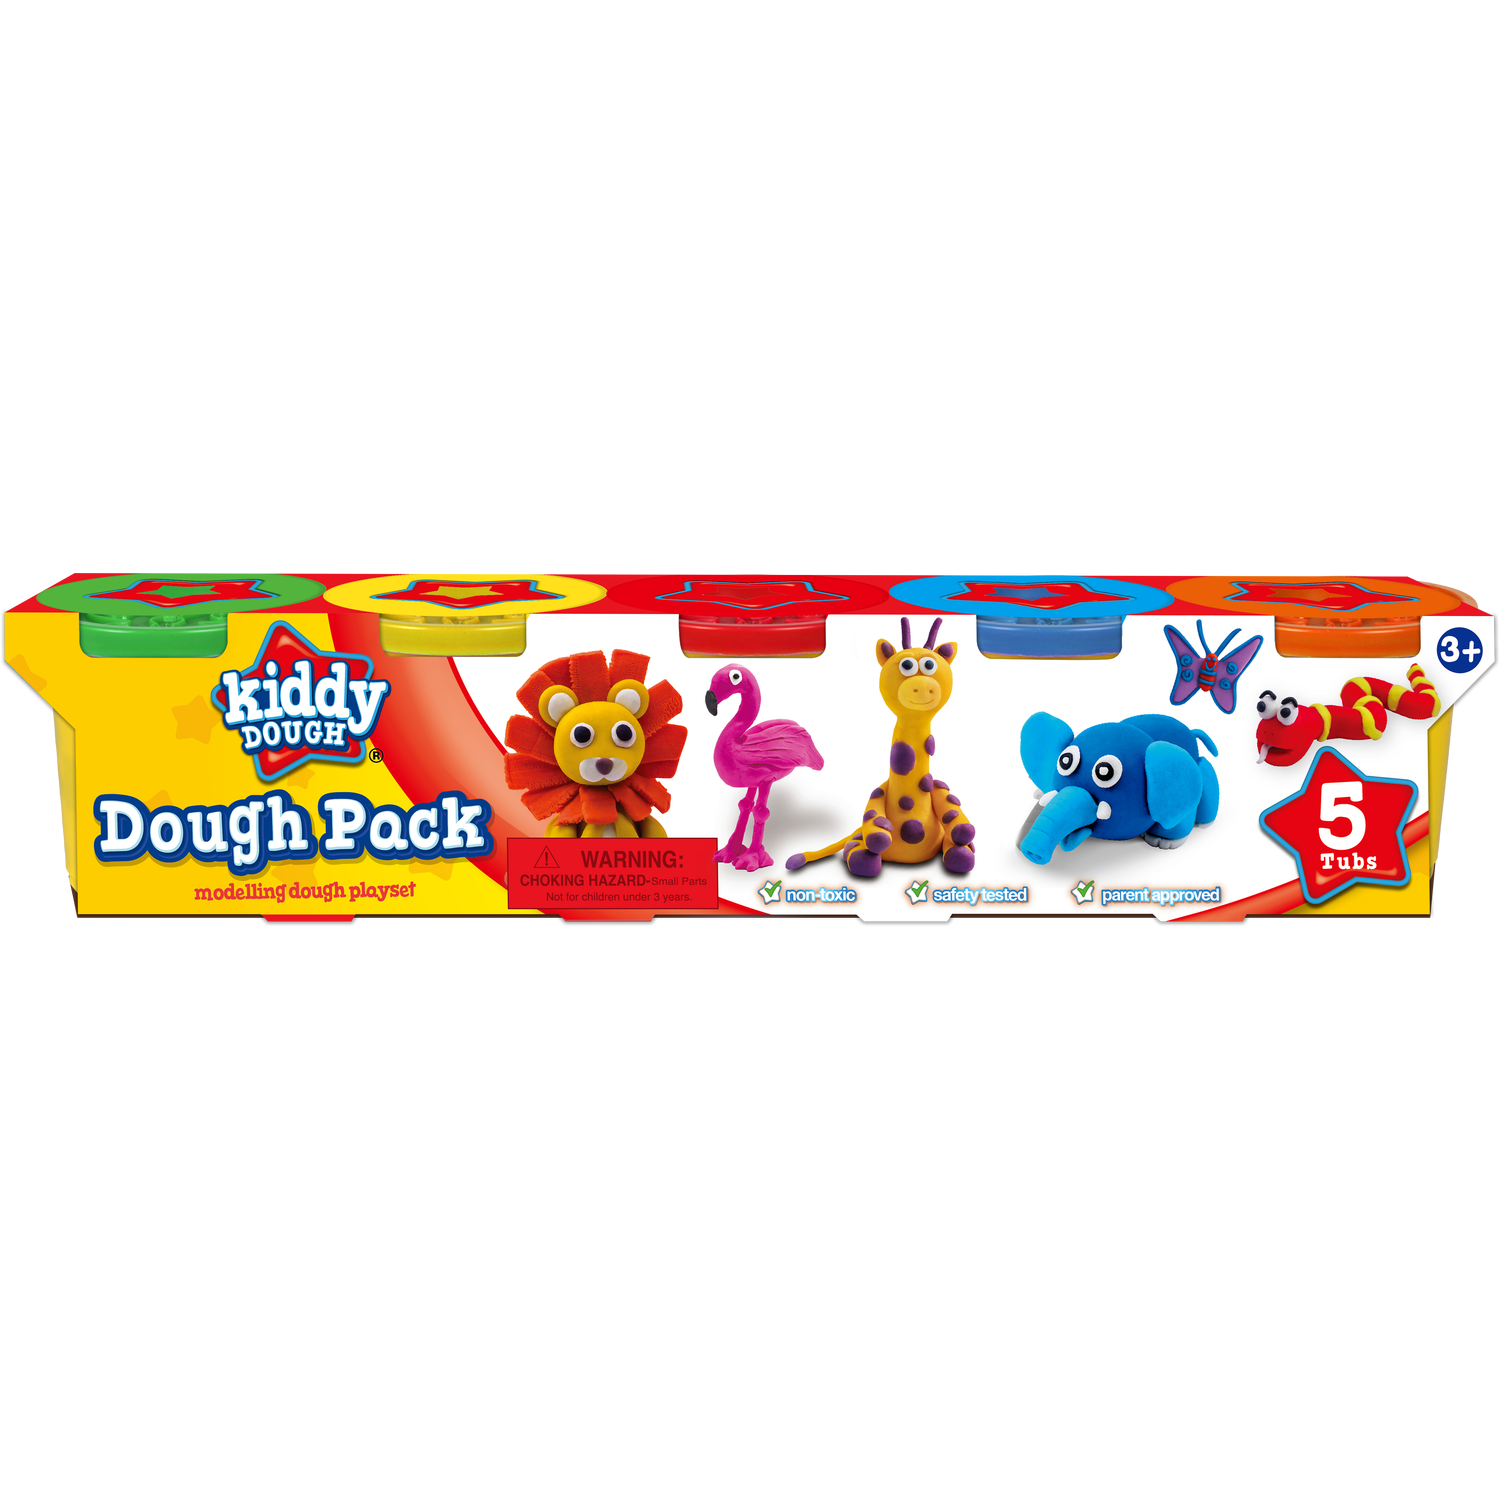 Pack of 5 Kiddy Dough Tubs Image